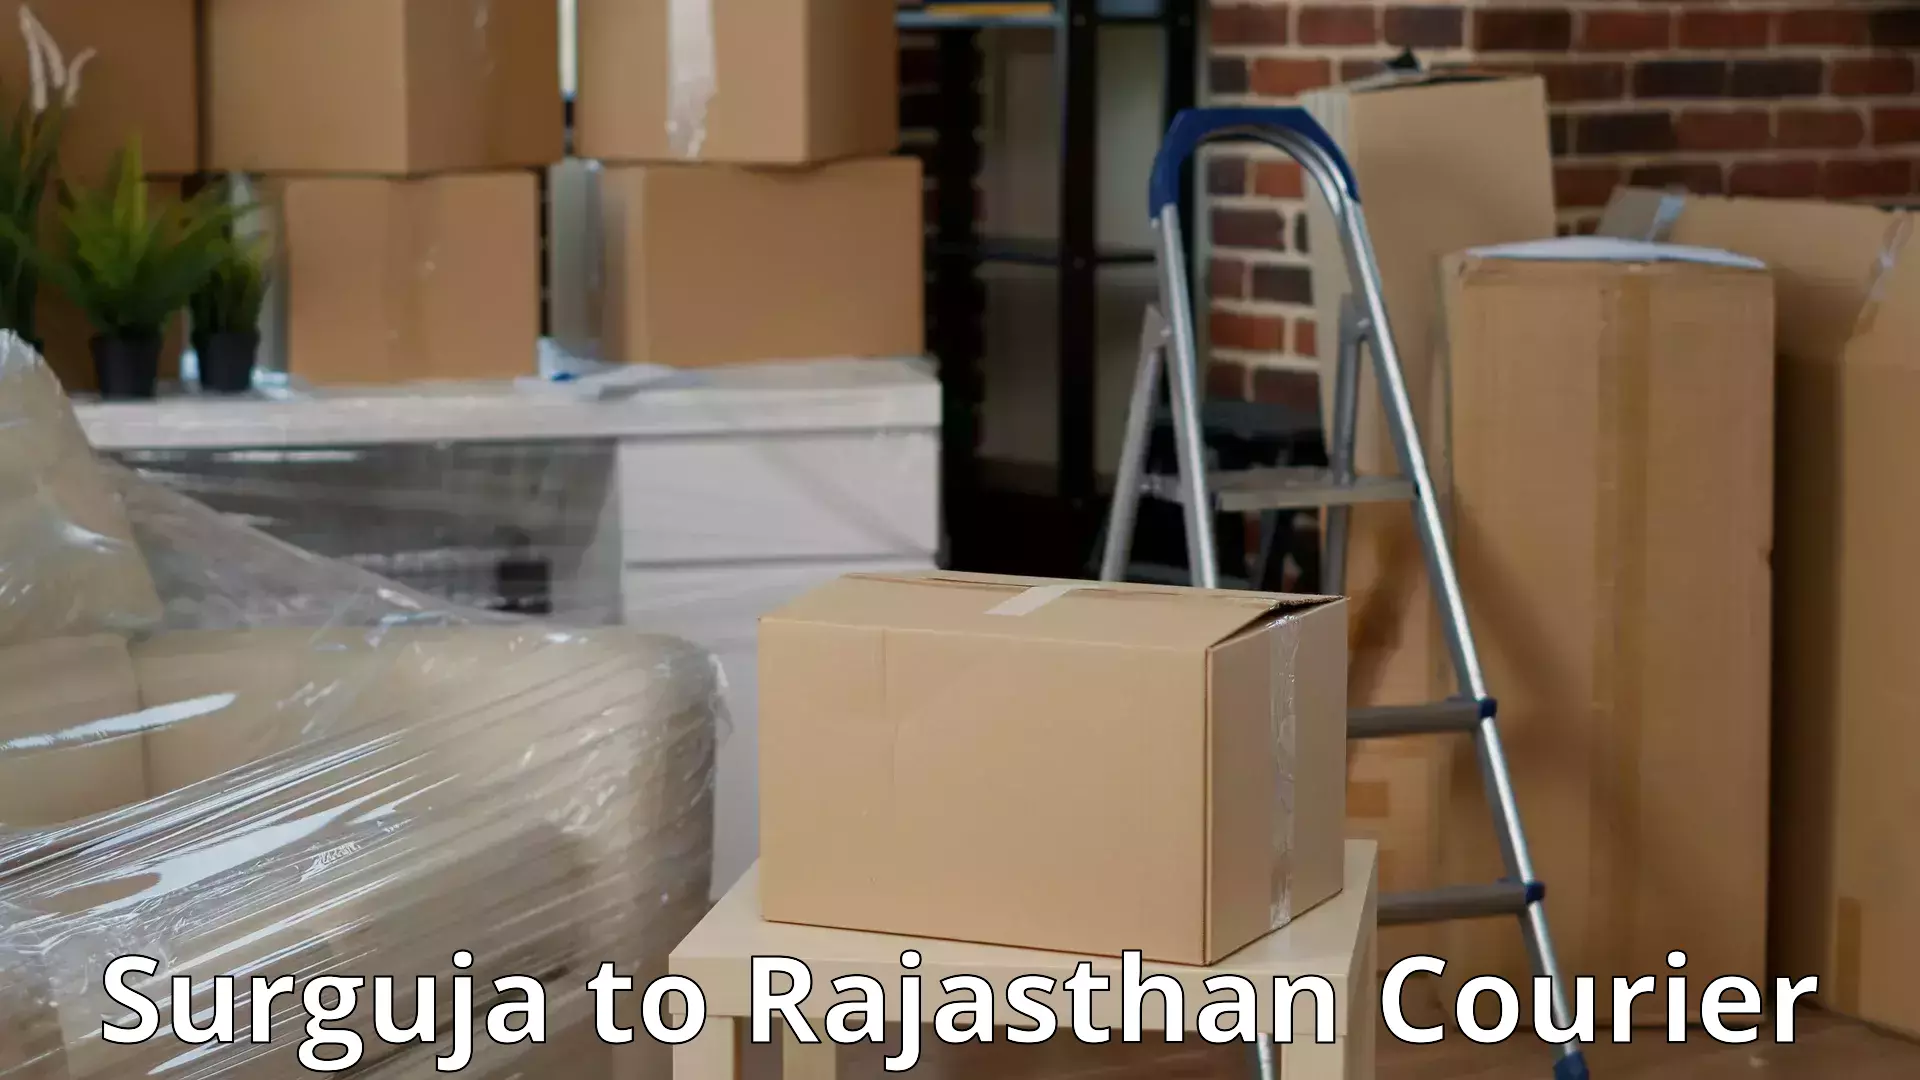 Professional packing and transport Surguja to Yeswanthapur